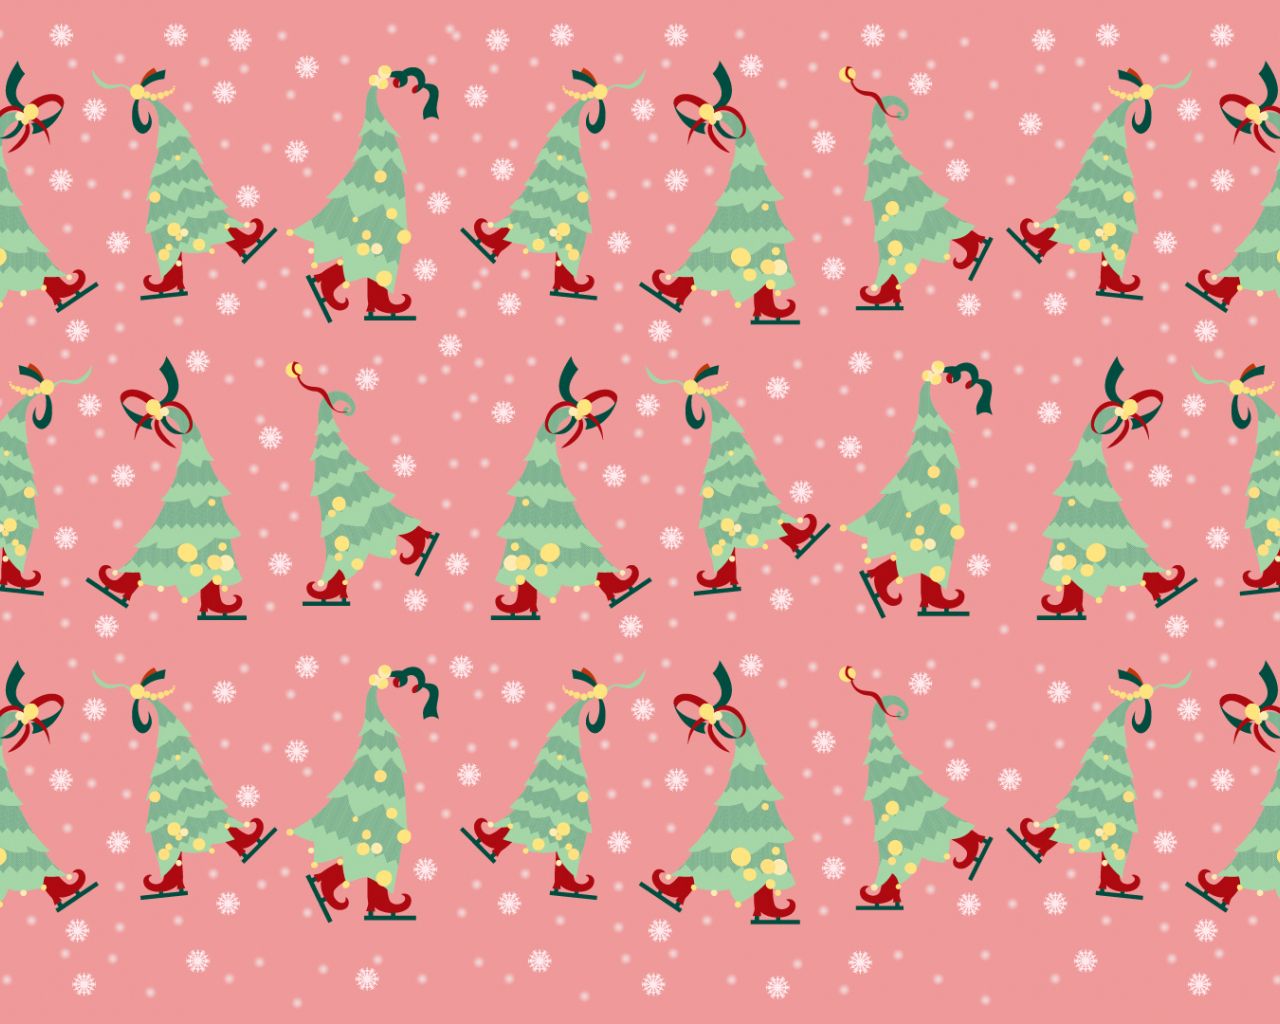 Free download 5 Festive Christmas Wallpaper for Laptops and Devices [1920x1080] for your Desktop, Mobile & Tablet. Explore Christmas Wallpaper Free. Free 3D Christmas Wallpaper, Free Animated Christmas Wallpaper